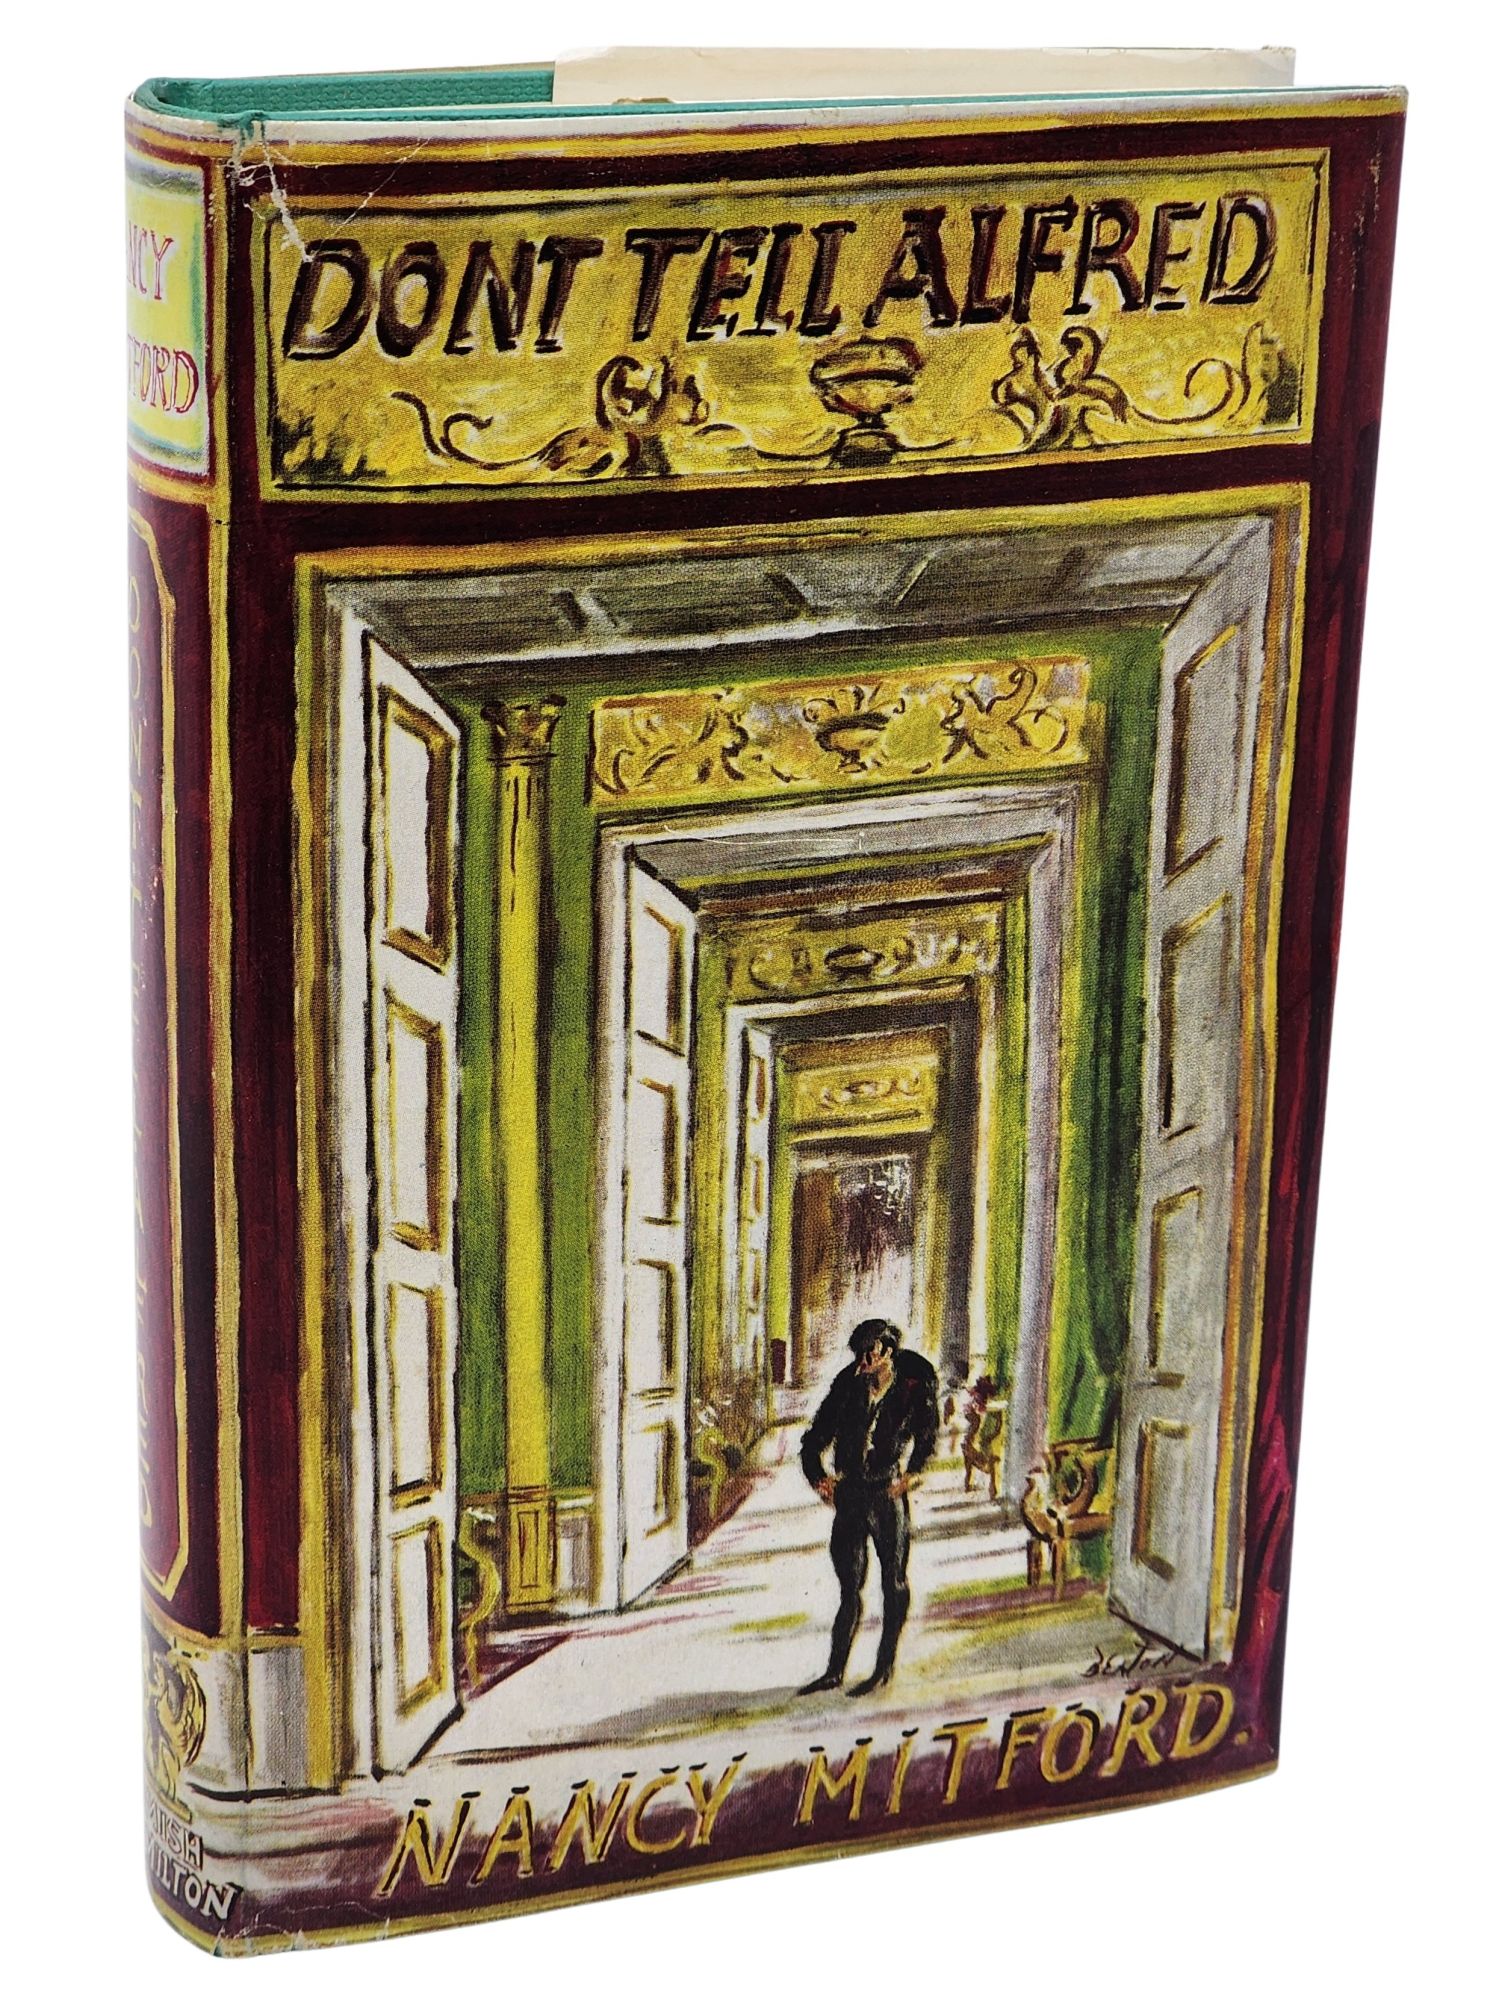 [Book #50959] DON'T TELL ALFRED. Nancy Mitford.